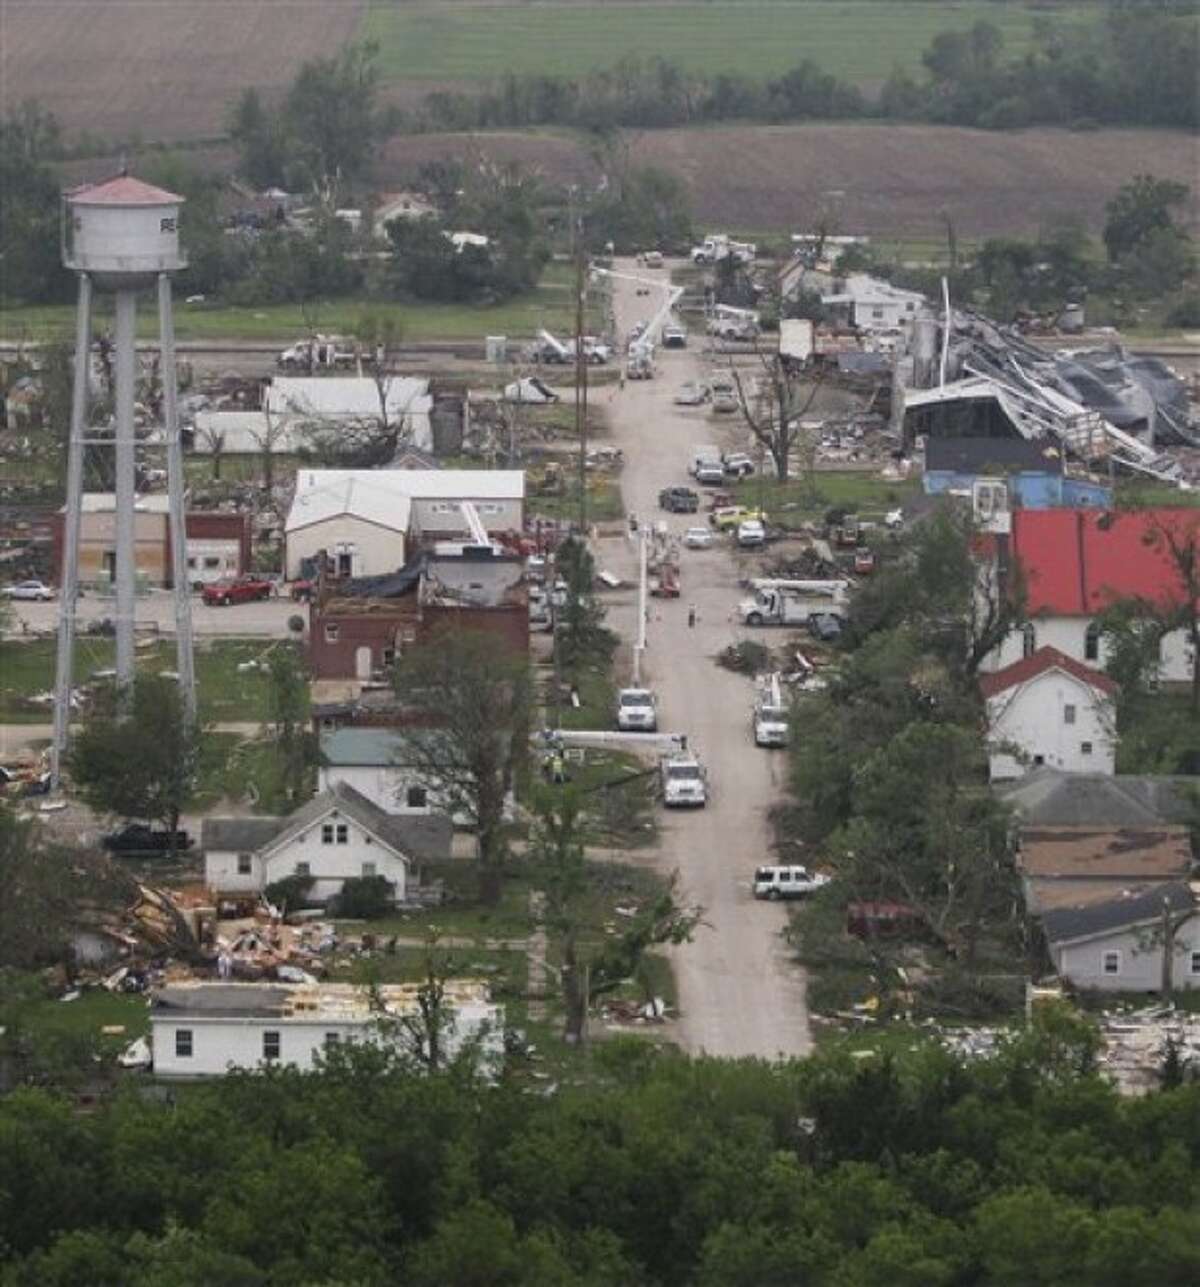 Power line repair and tornado clean up along Franklin Street in Reading, Kan., are viewed from the helicopter of Gov. Sam Brownback during a tour Monday, May 23, 2011. (AP Photo/Orlin Wagner)